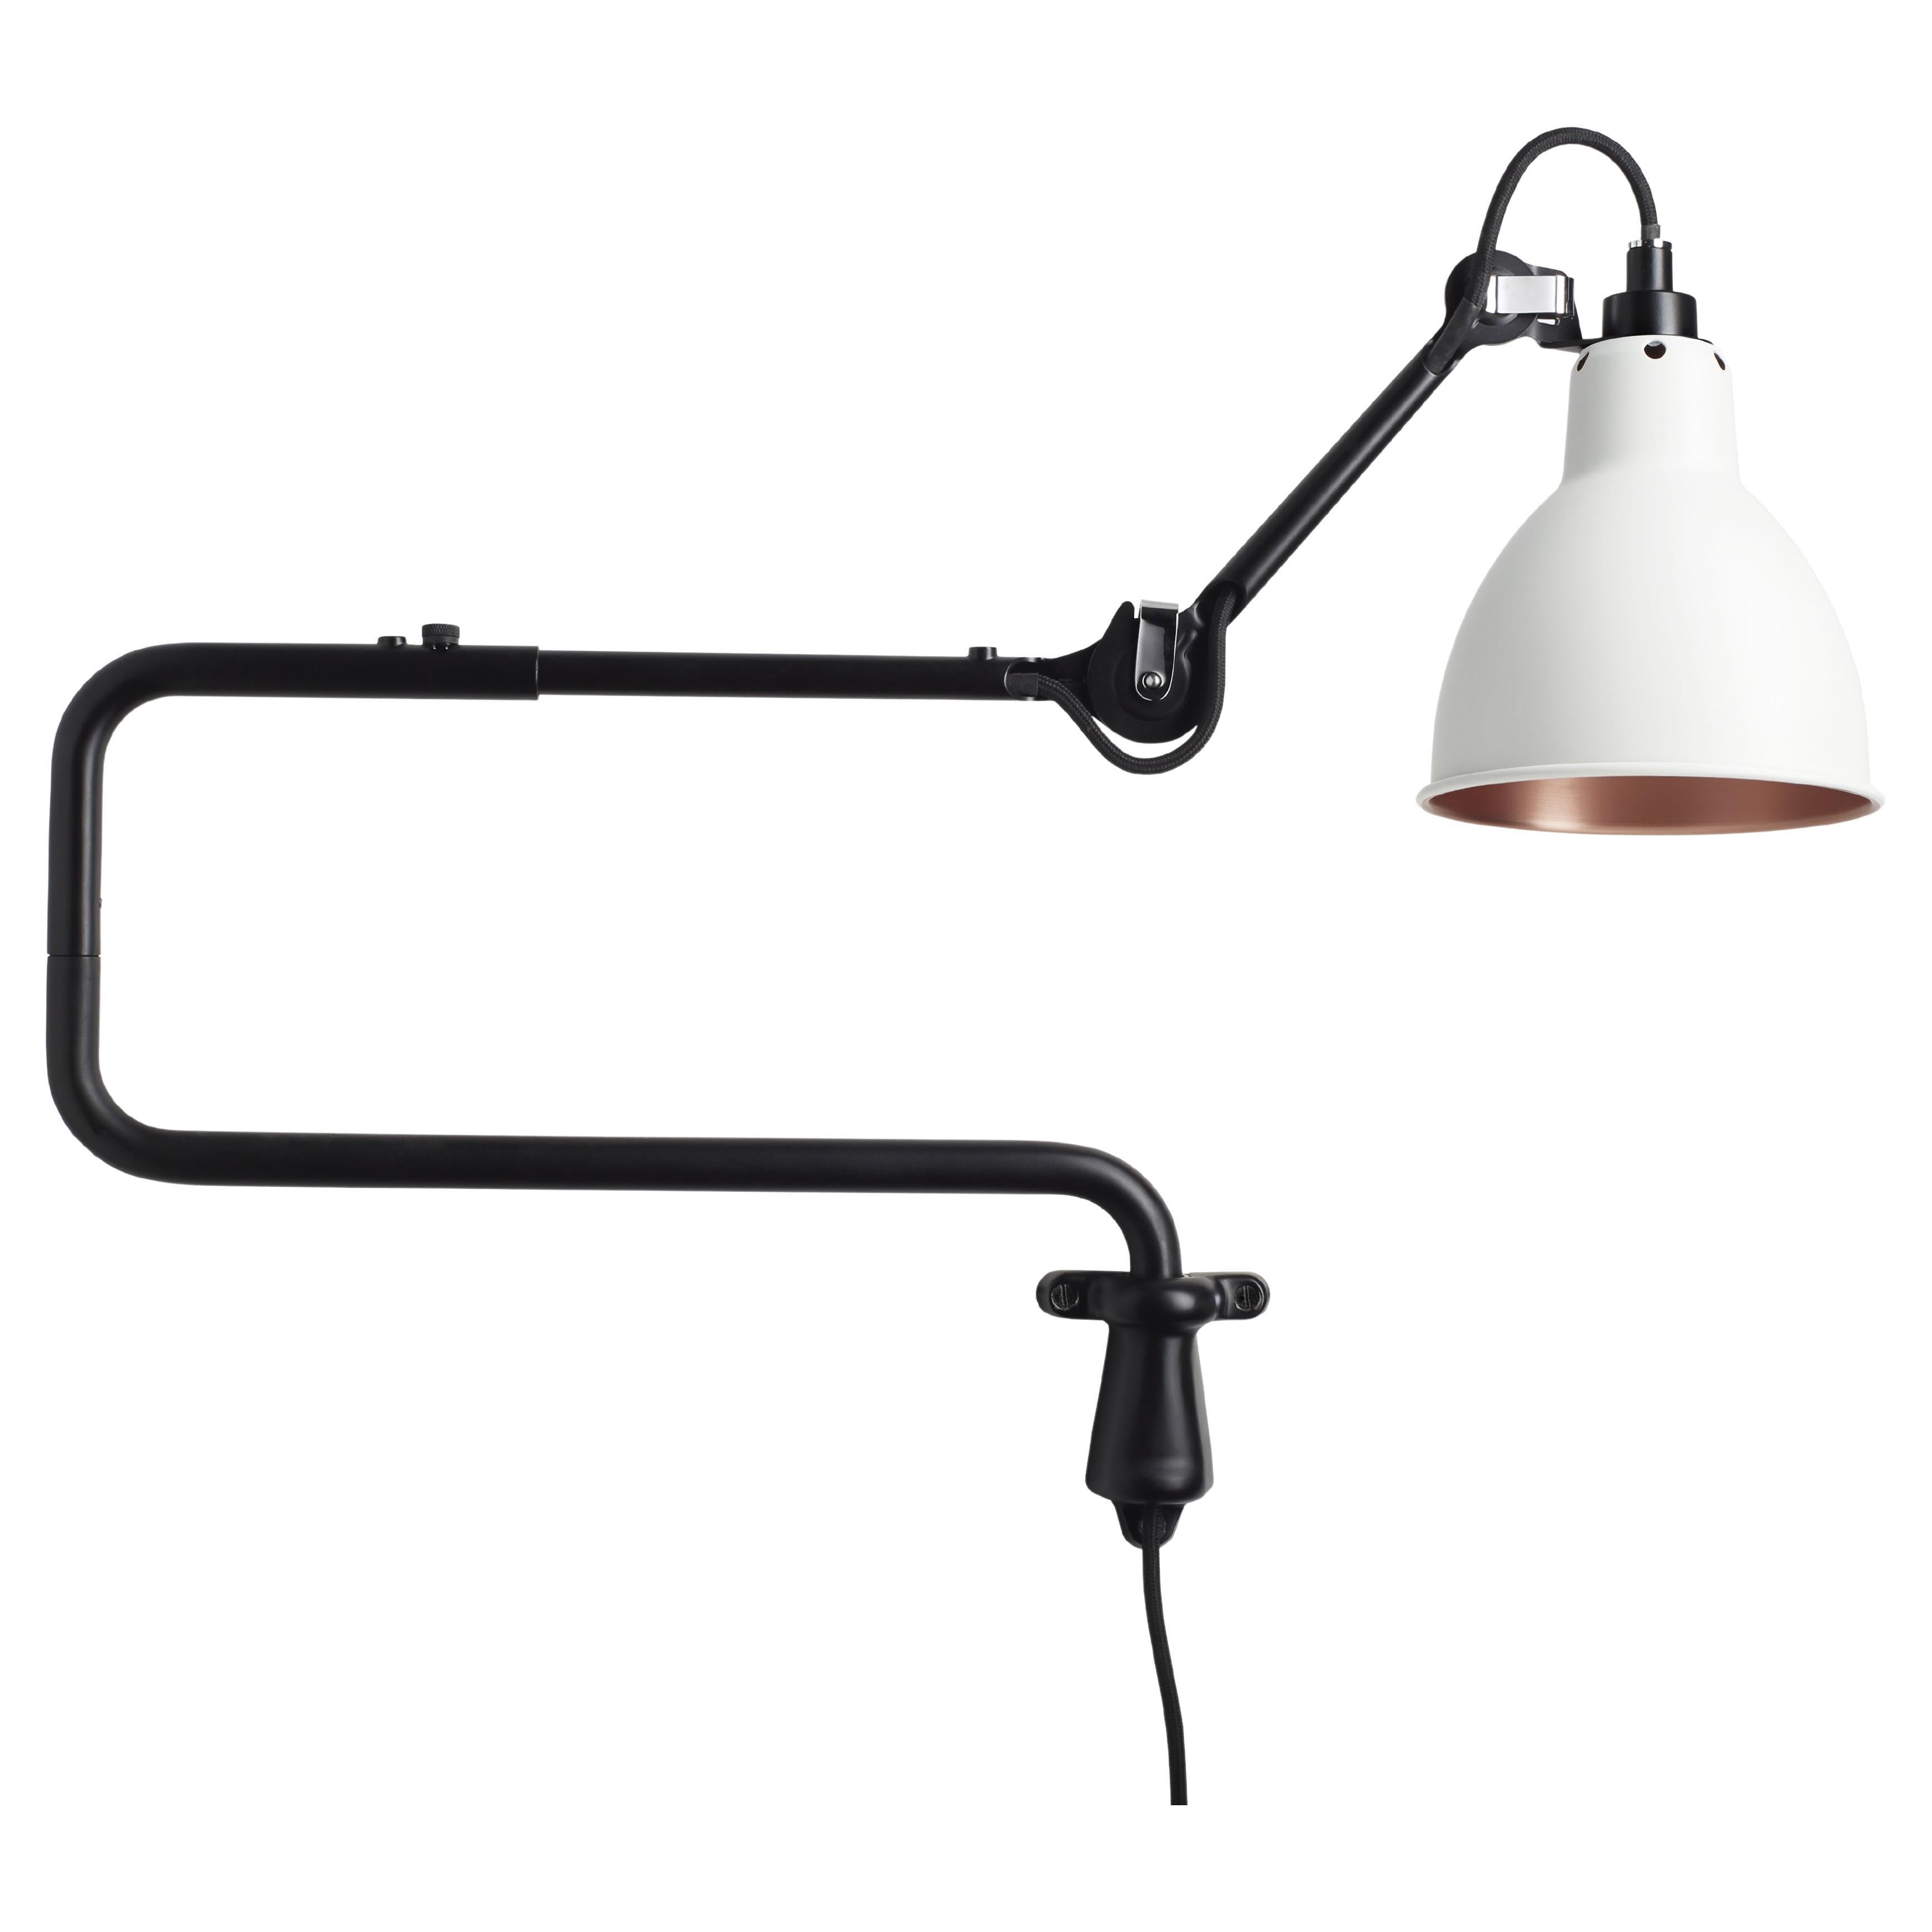 DCW Editions La Lampe Gras N°303 Wall Lamp in Black Arm and White Copper Shade For Sale